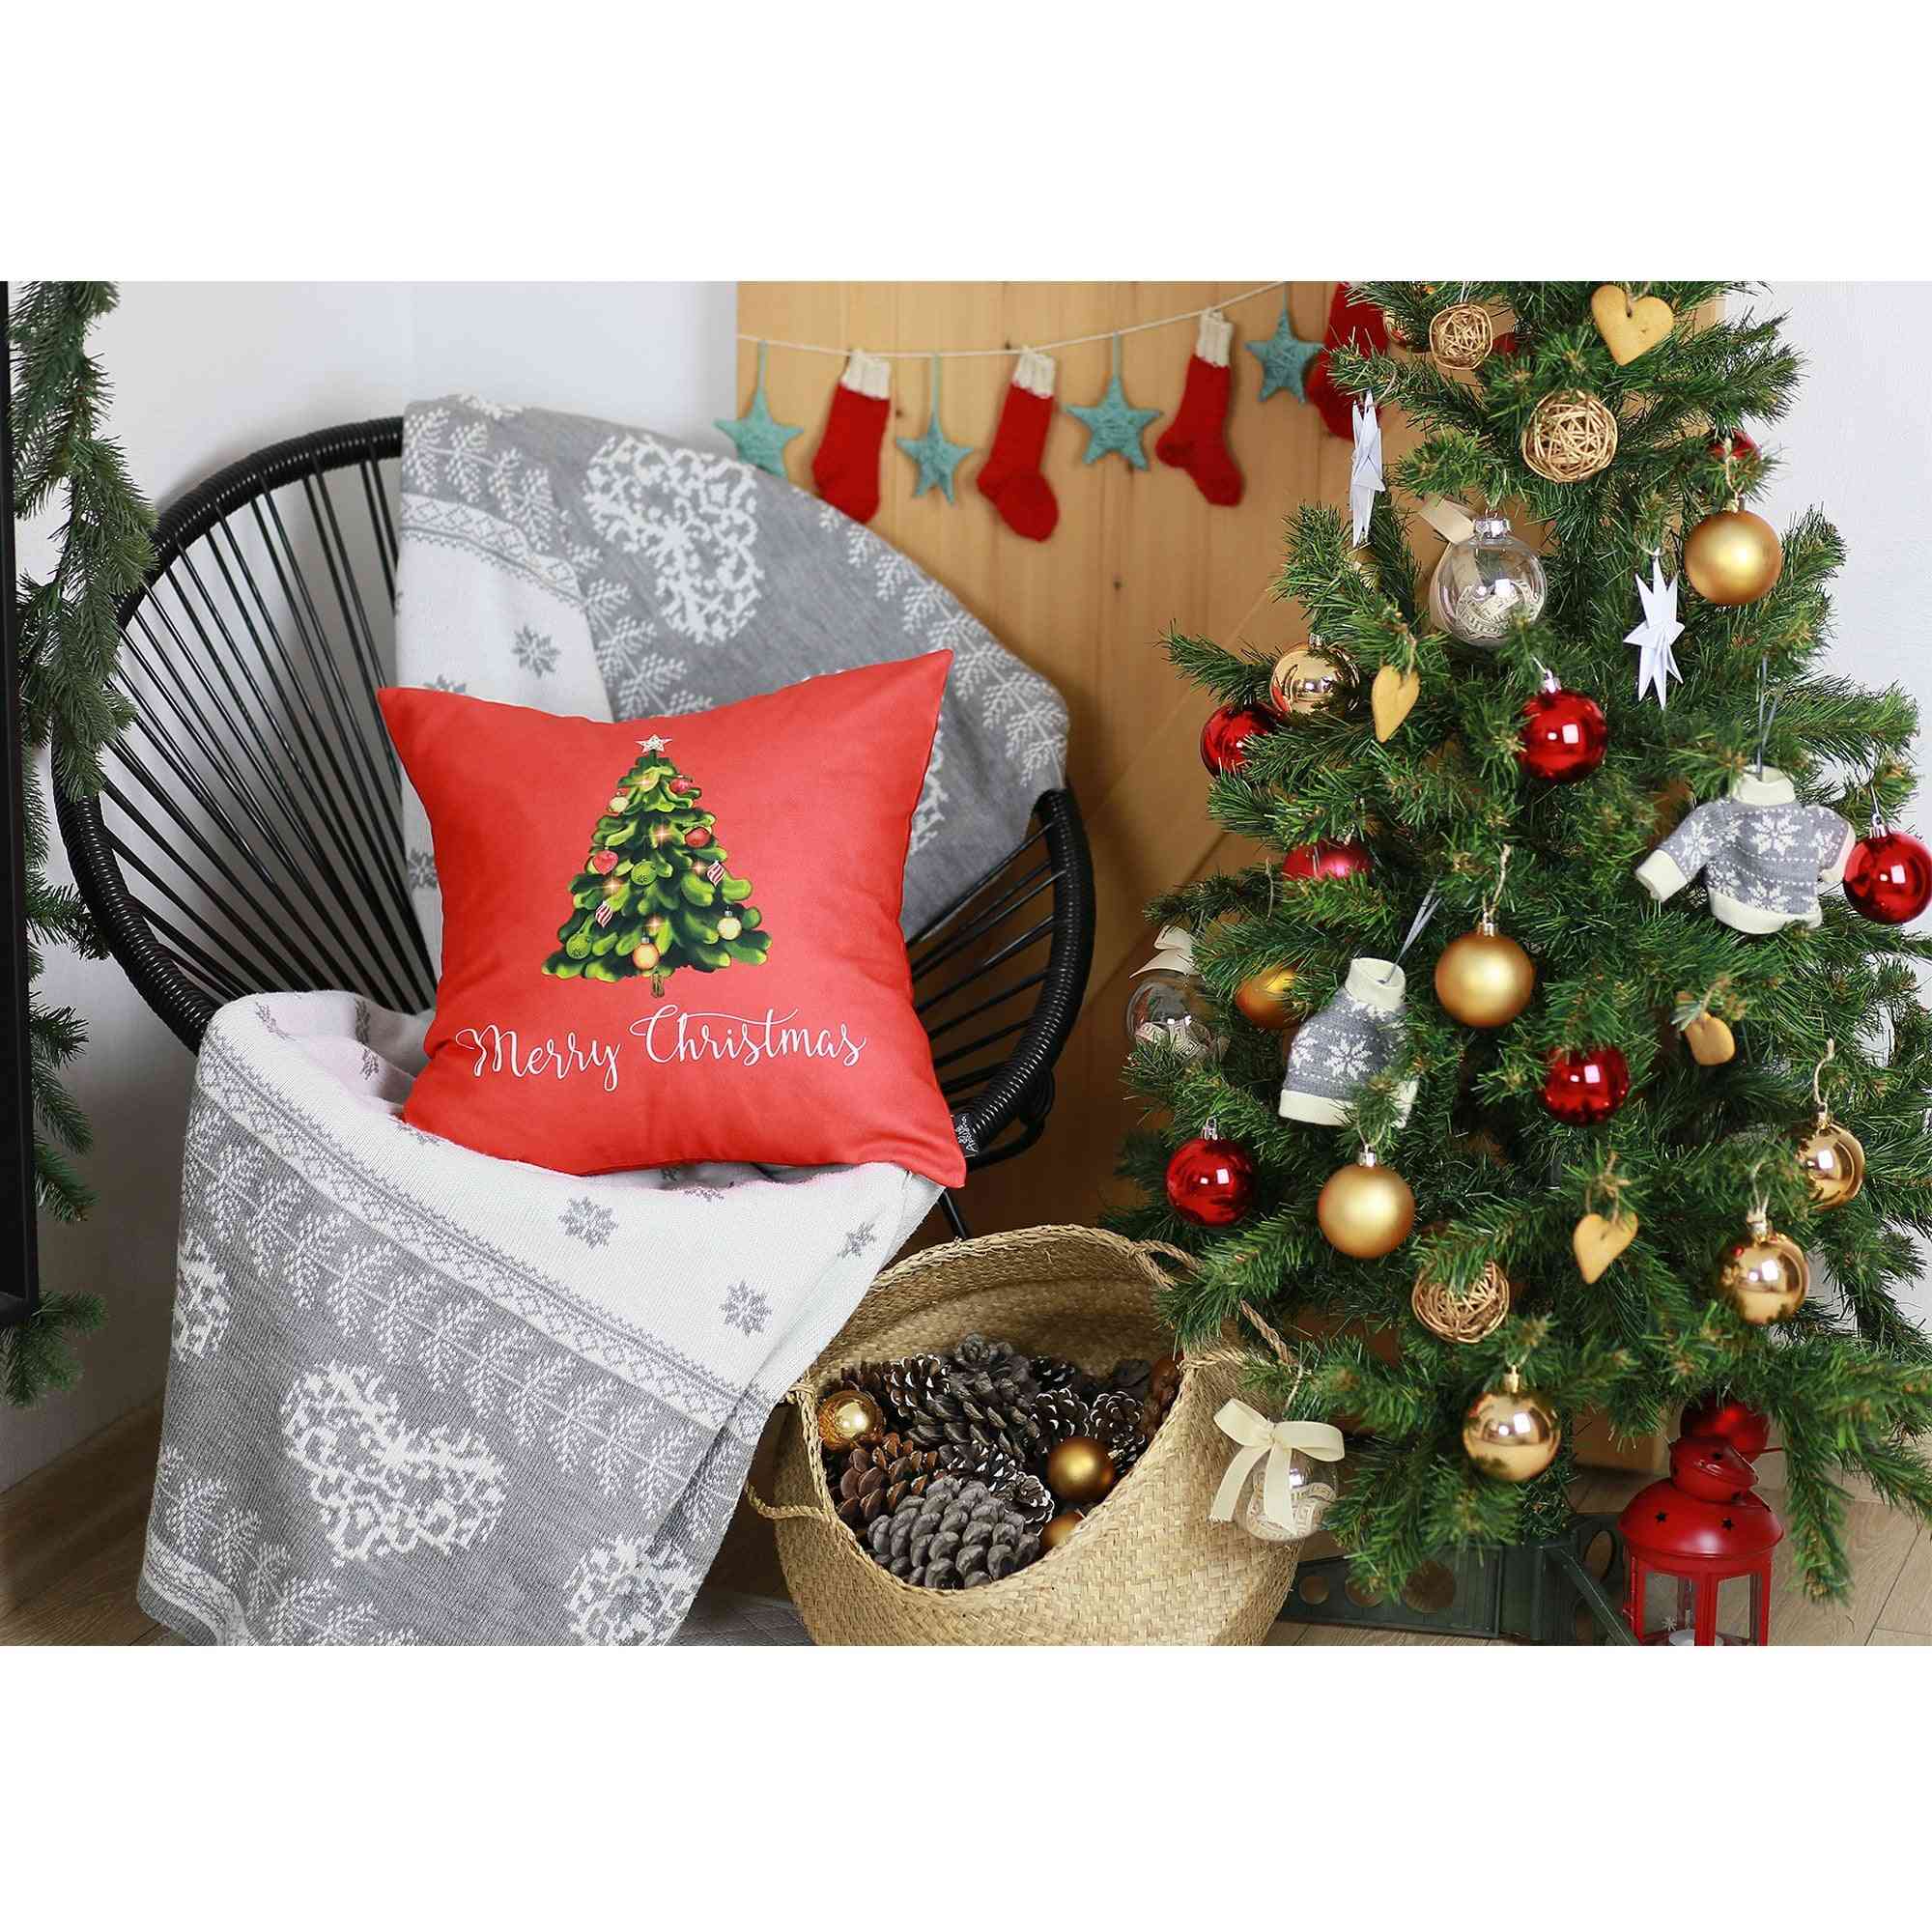 Printed Merry Christmas Tree Decorative Throw Pillow Cover